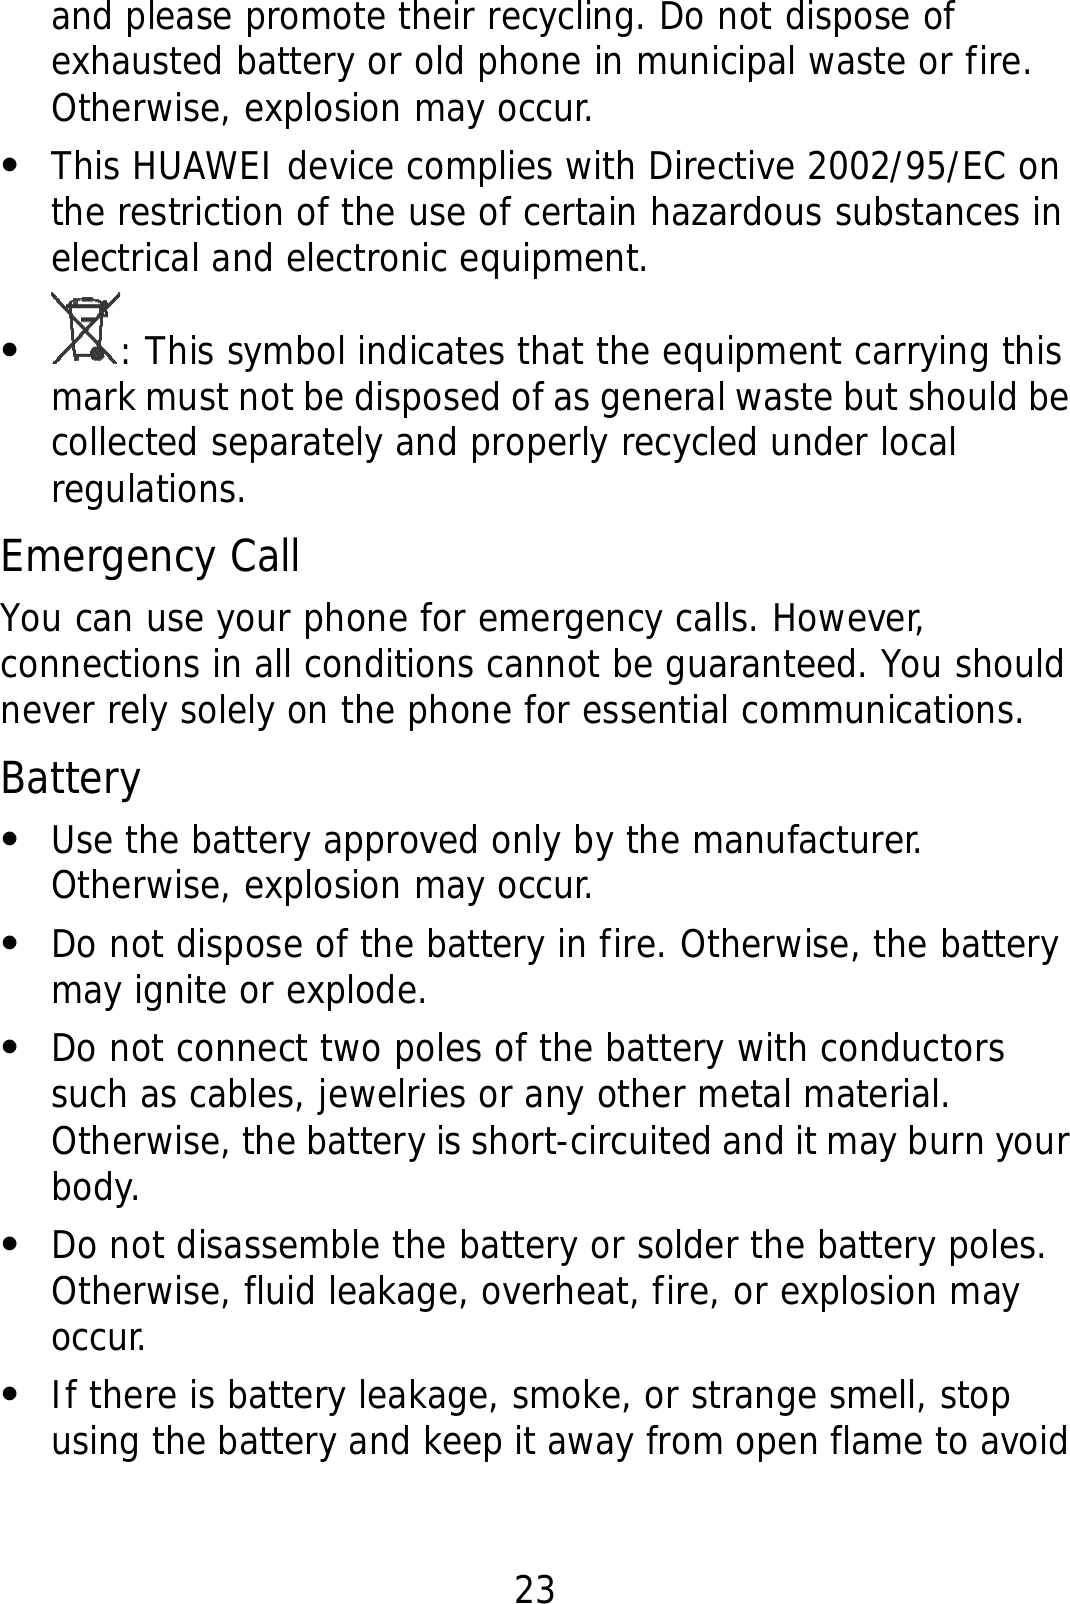 23 and please promote their recycling. Do not dispose of exhausted battery or old phone in municipal waste or fire. Otherwise, explosion may occur. z This HUAWEI device complies with Directive 2002/95/EC on the restriction of the use of certain hazardous substances in electrical and electronic equipment. z : This symbol indicates that the equipment carrying this mark must not be disposed of as general waste but should be collected separately and properly recycled under local regulations. Emergency Call You can use your phone for emergency calls. However, connections in all conditions cannot be guaranteed. You should never rely solely on the phone for essential communications. Battery z Use the battery approved only by the manufacturer. Otherwise, explosion may occur. z Do not dispose of the battery in fire. Otherwise, the battery may ignite or explode. z Do not connect two poles of the battery with conductors such as cables, jewelries or any other metal material. Otherwise, the battery is short-circuited and it may burn your body. z Do not disassemble the battery or solder the battery poles. Otherwise, fluid leakage, overheat, fire, or explosion may occur. z If there is battery leakage, smoke, or strange smell, stop using the battery and keep it away from open flame to avoid 